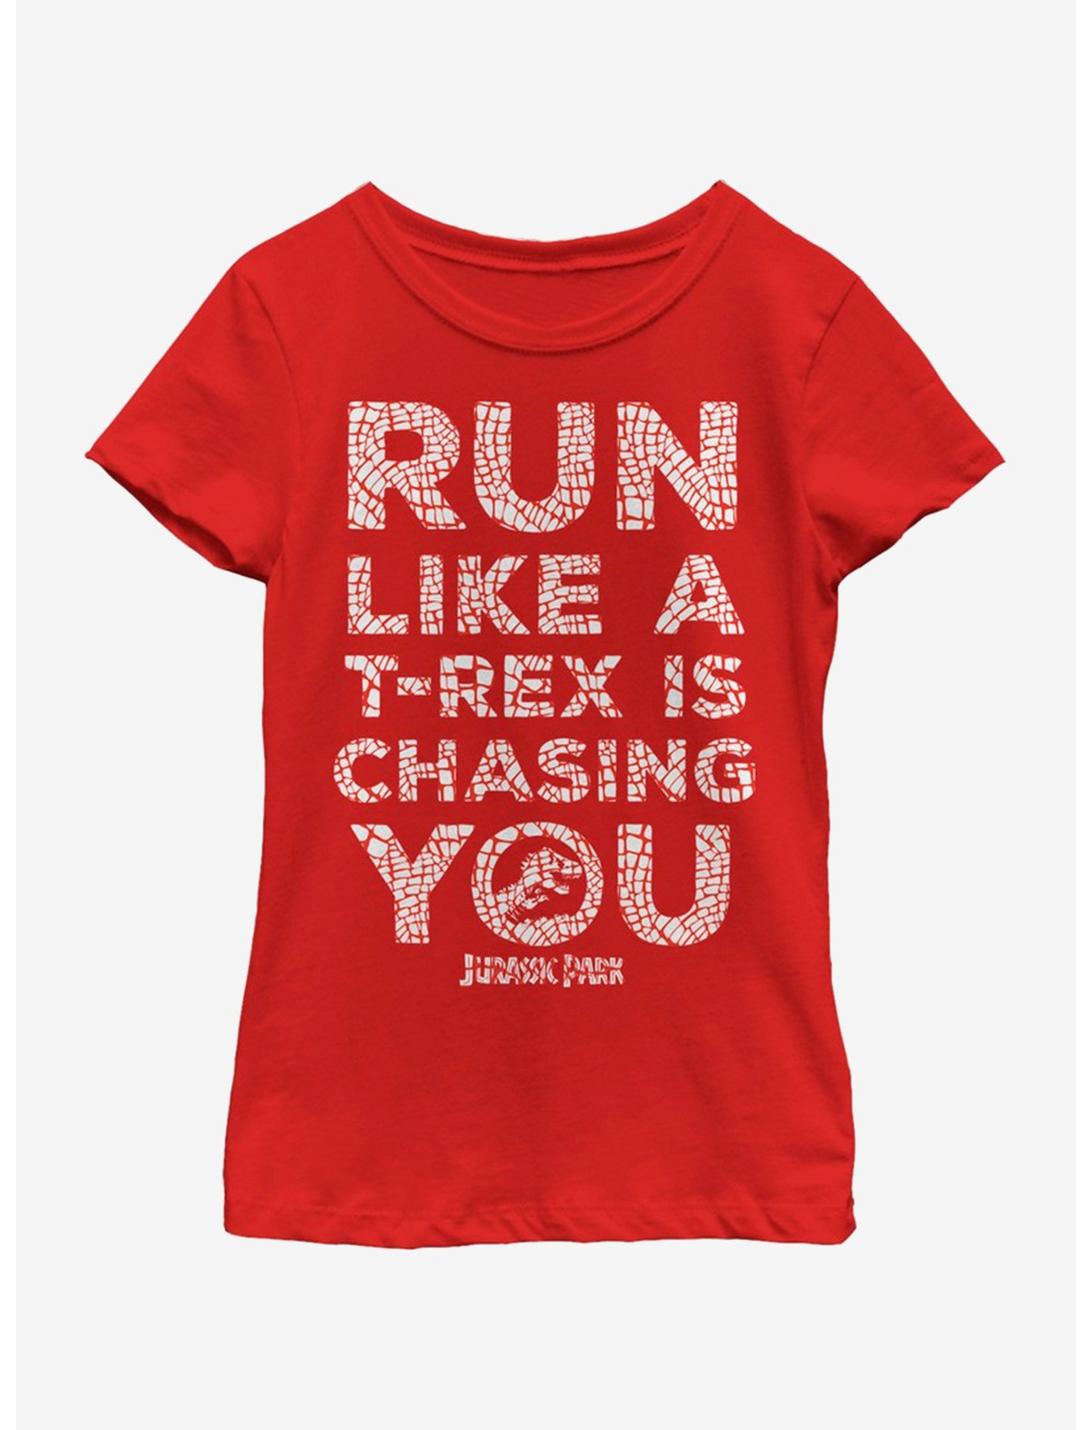 Jurassic Park T-Rex Chase Solid Youth Girls T-Shirt, RED, hi-res